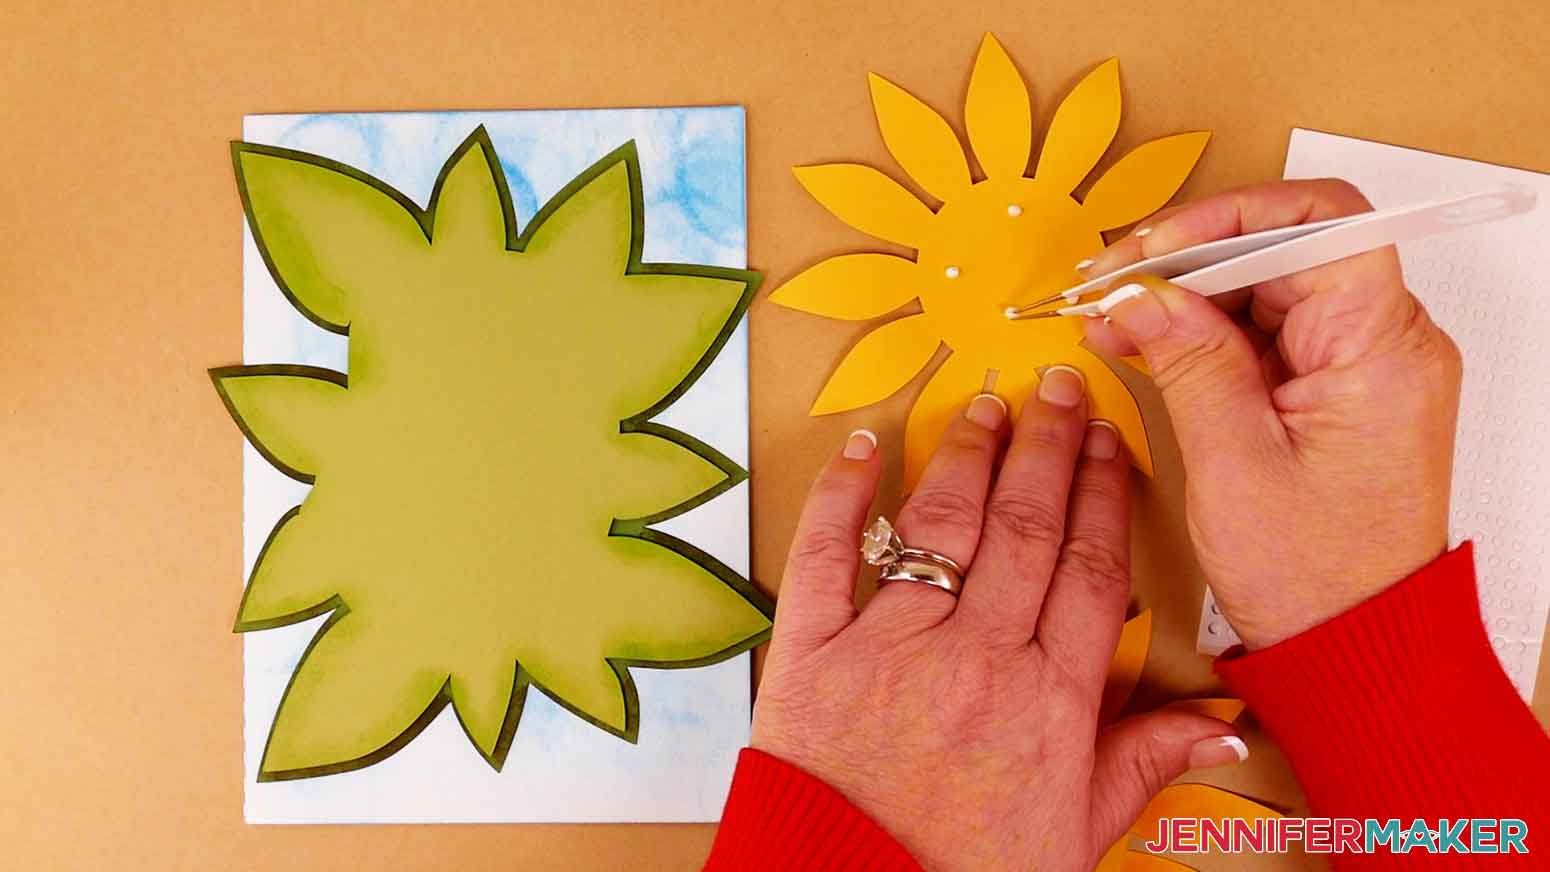 Apply foam adhesive to the back center section of the top sunflower petal layer.